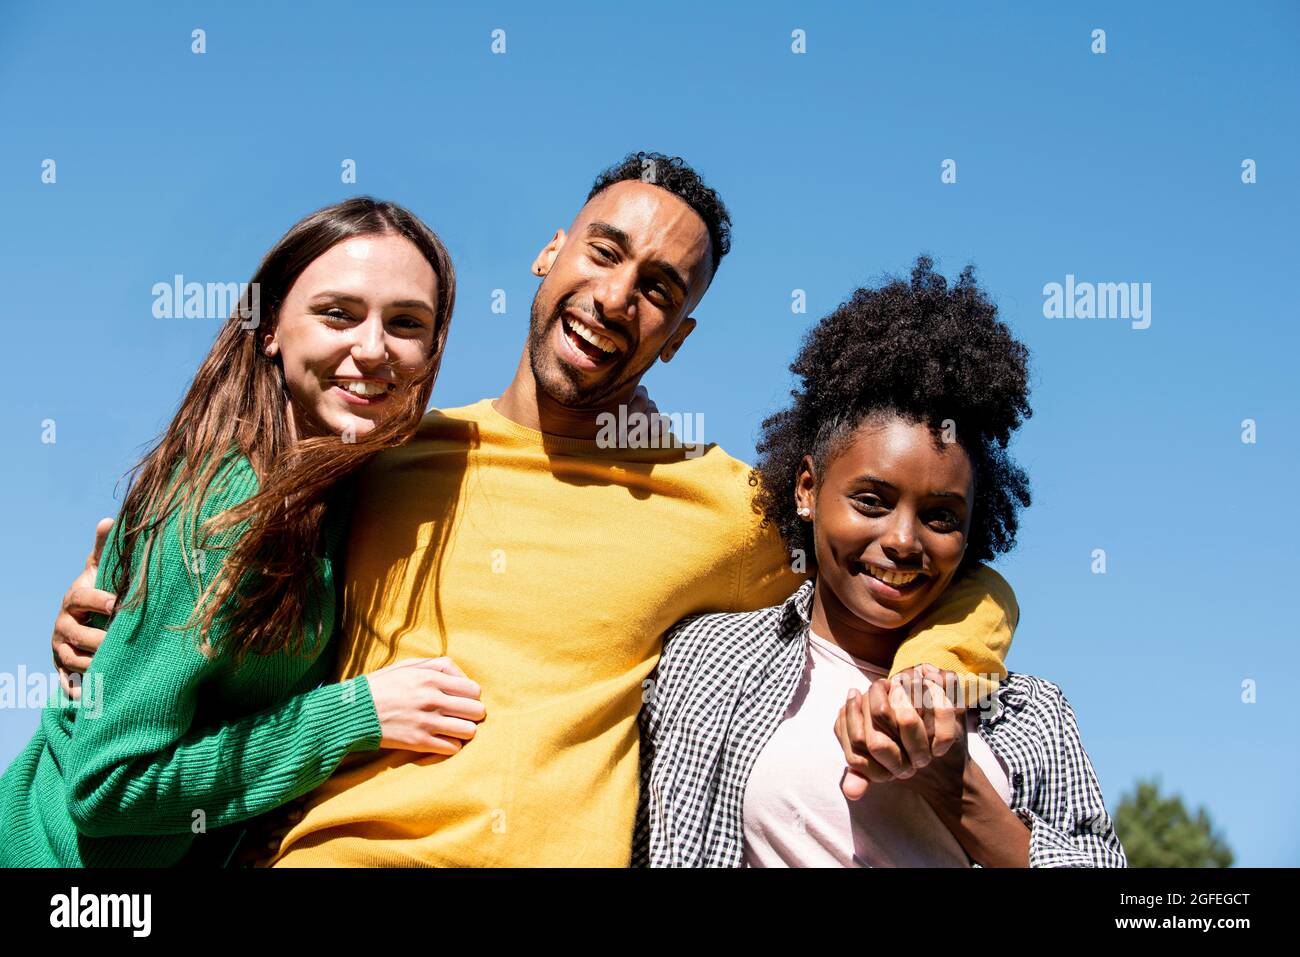 Portrait of smiling young friends standing with arm around in public park Stock Photo